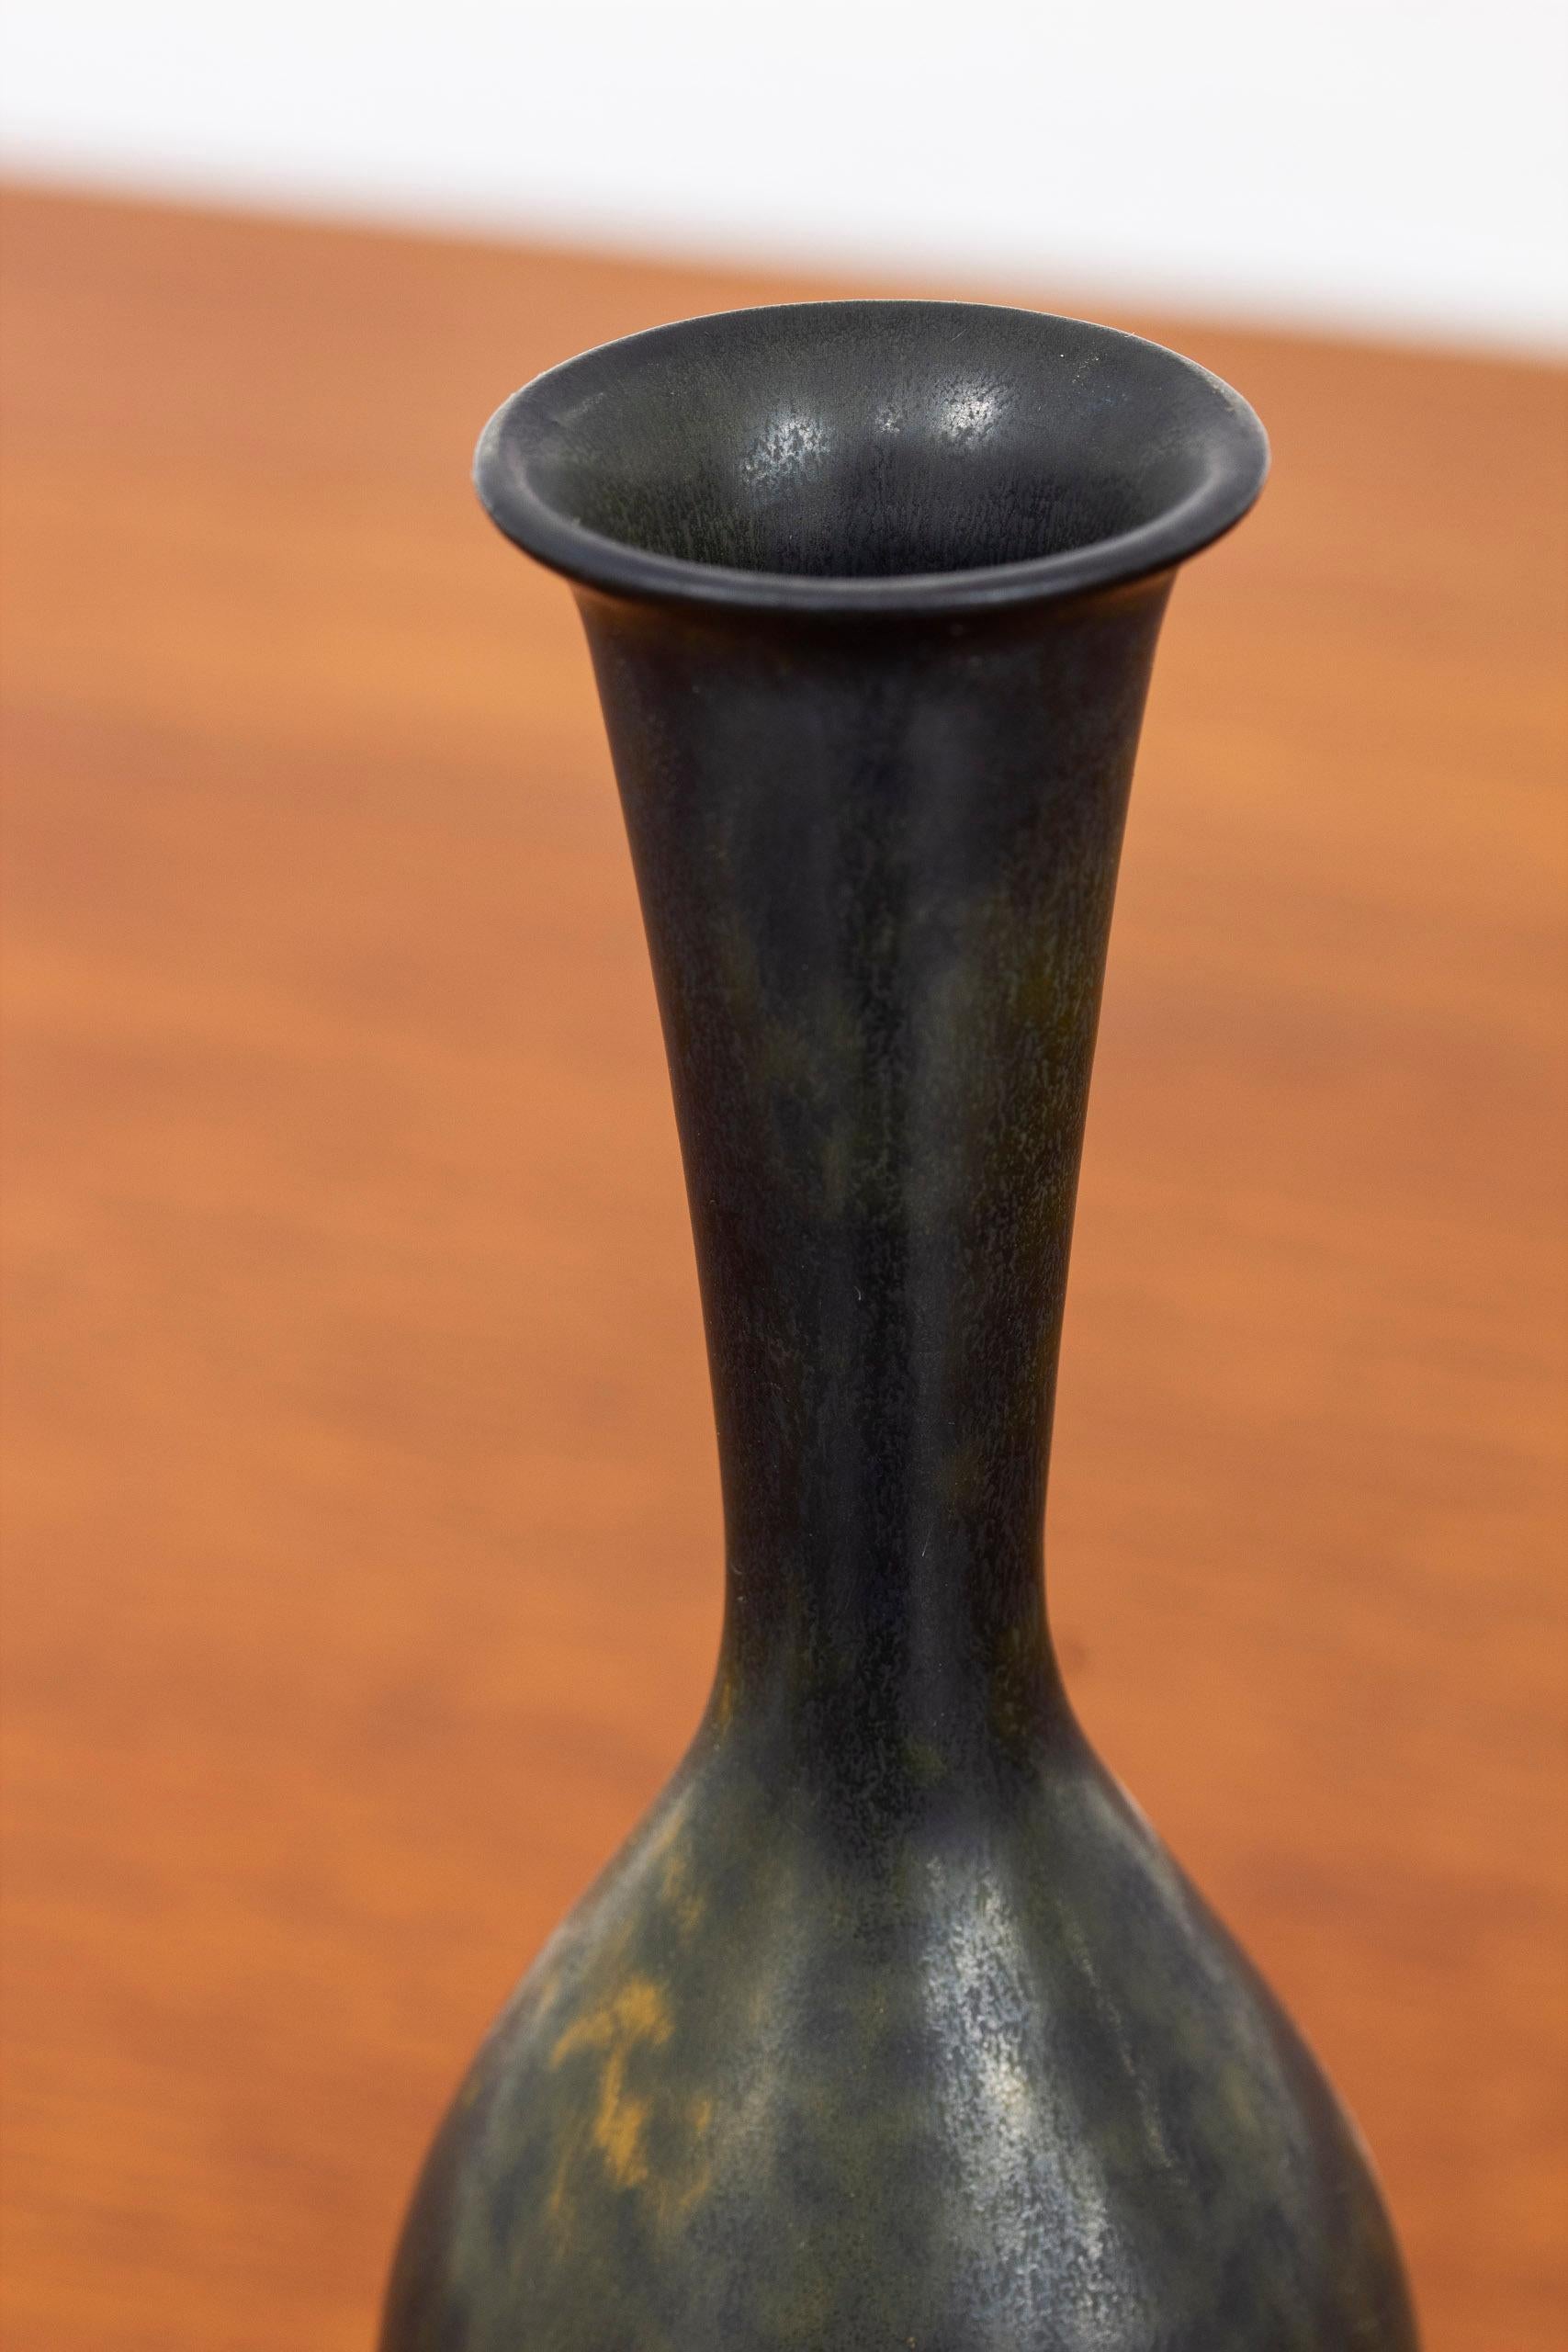 Stoneware vase designed by Gunnar Nylund. Hand made at Rörstrand in the 1940s. With black glaze with hints of green. Very good vintage condition with light wear and patina.

Dimensions: Ø. 6 H. 24 cm.

